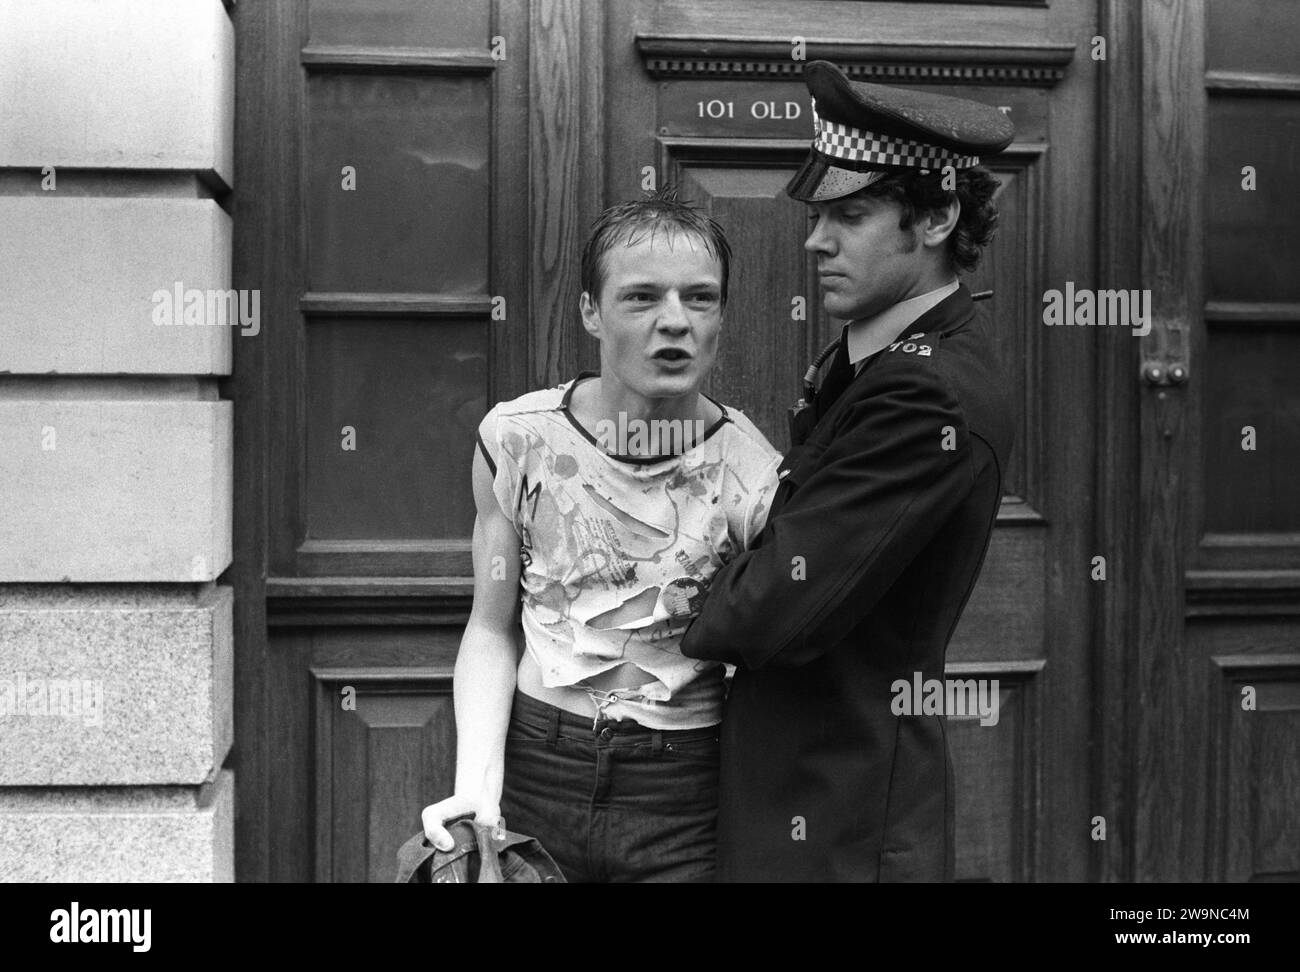 Punks UK 1970s. Punk Rocker arrest by policeman in Sloane Square Chelsea. He is wearing a fashionably torn T-shirt, neatly pinned together from Smutz, which was upstairs in Beaufort Market at 374 King’s Road. Chelsea, London, England 1977 1970s HOMER SYKES Stock Photo